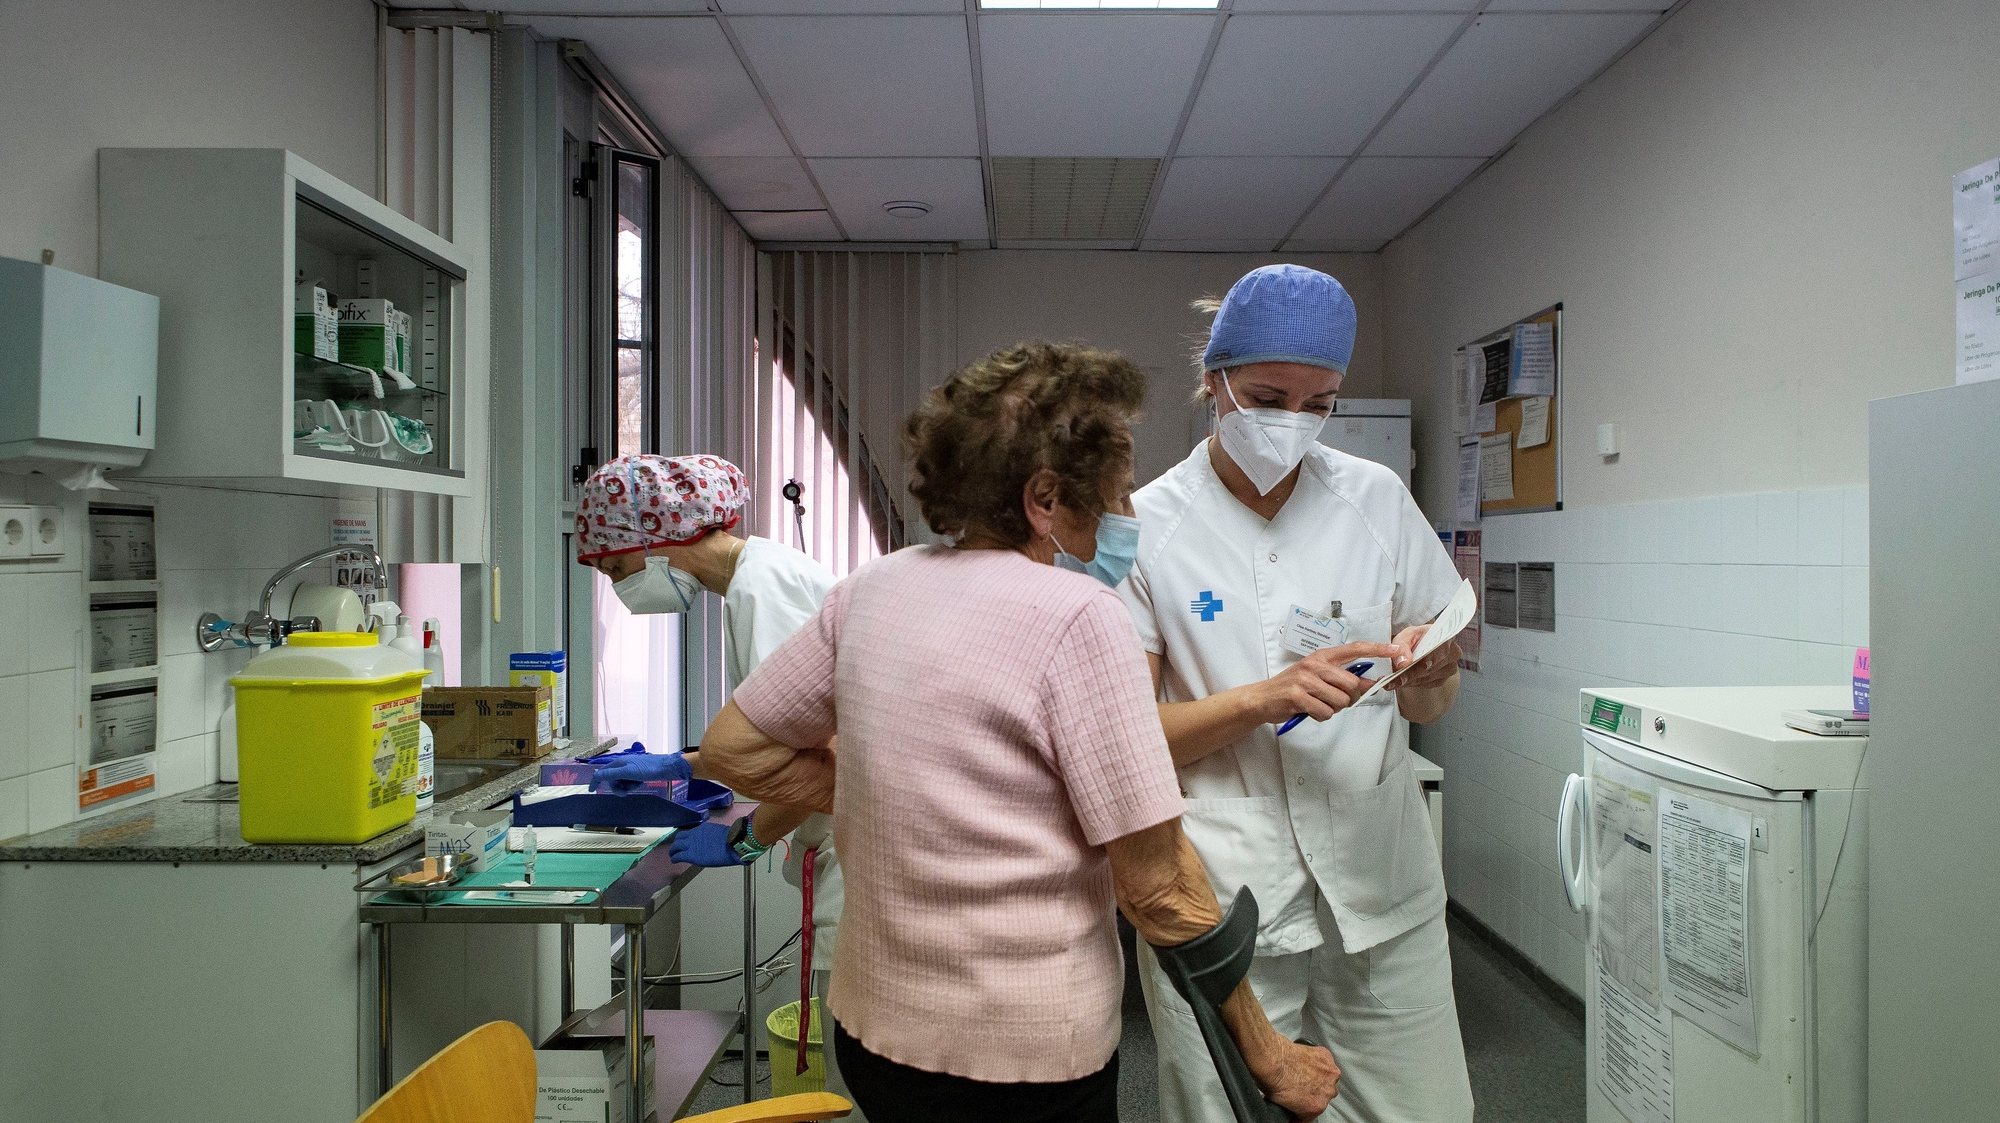 epa09048674 A nurse (R) chats with an elderly lady at a public health center during the vaccination campaign for people older than 80 years, in Barcelona, Catalonia, Spain, 03 March 2021. Although the number of coronavirus cases continue falling in the region, a total of 1,559 new COVID-19 cases and 44 fatalities were recorded in last 24 hours.  EPA/ENRIC FONTCUBERTA